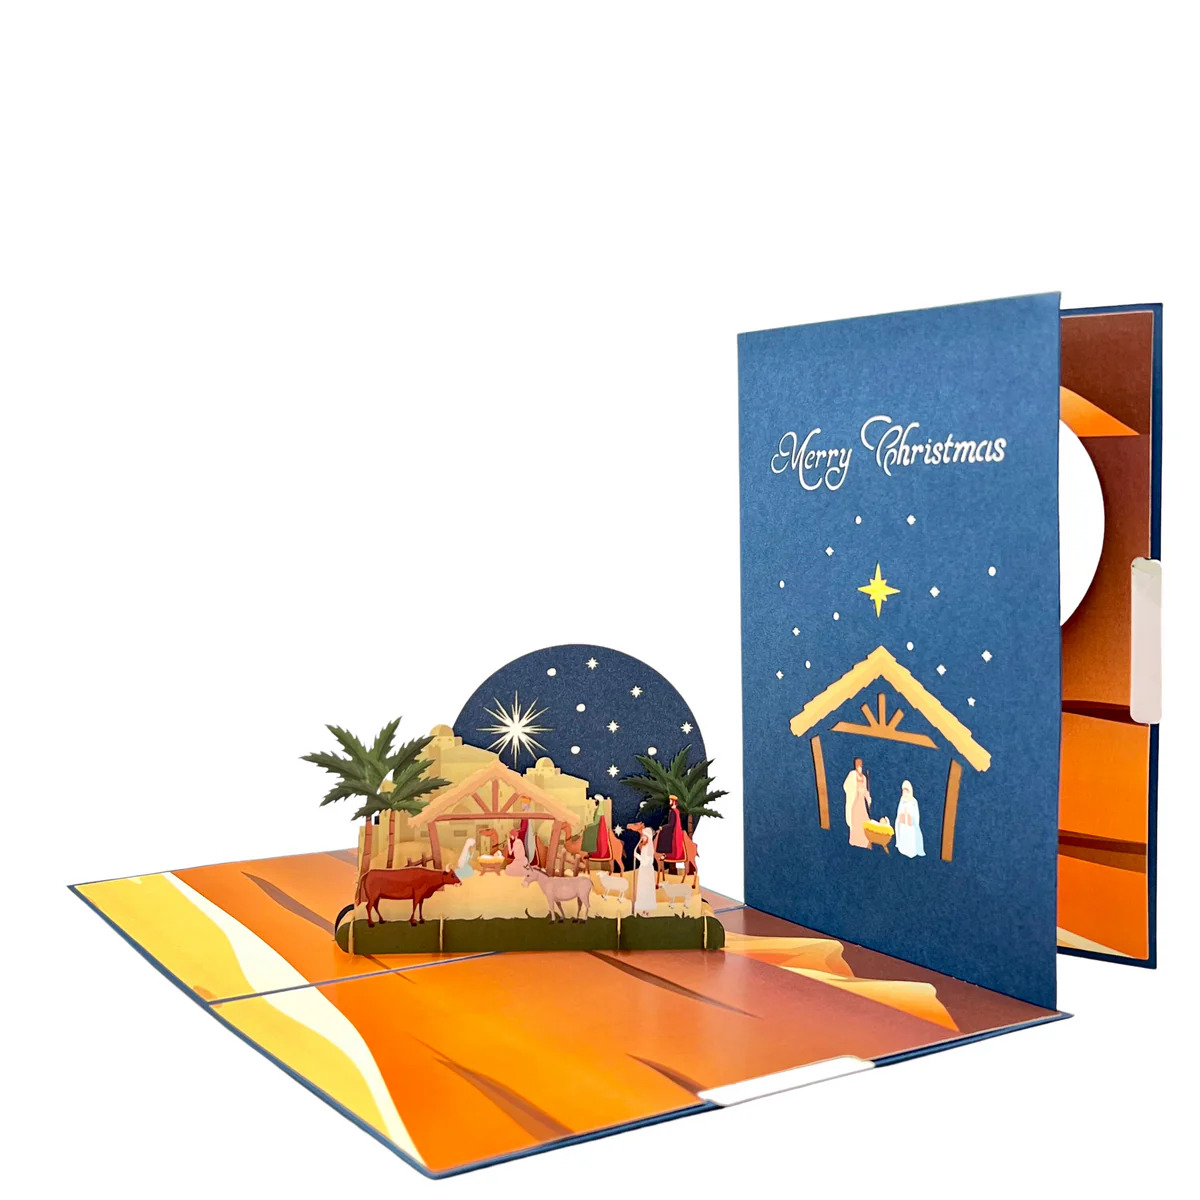 worldpopcards holy night nativity for 3d pop up christmas cards